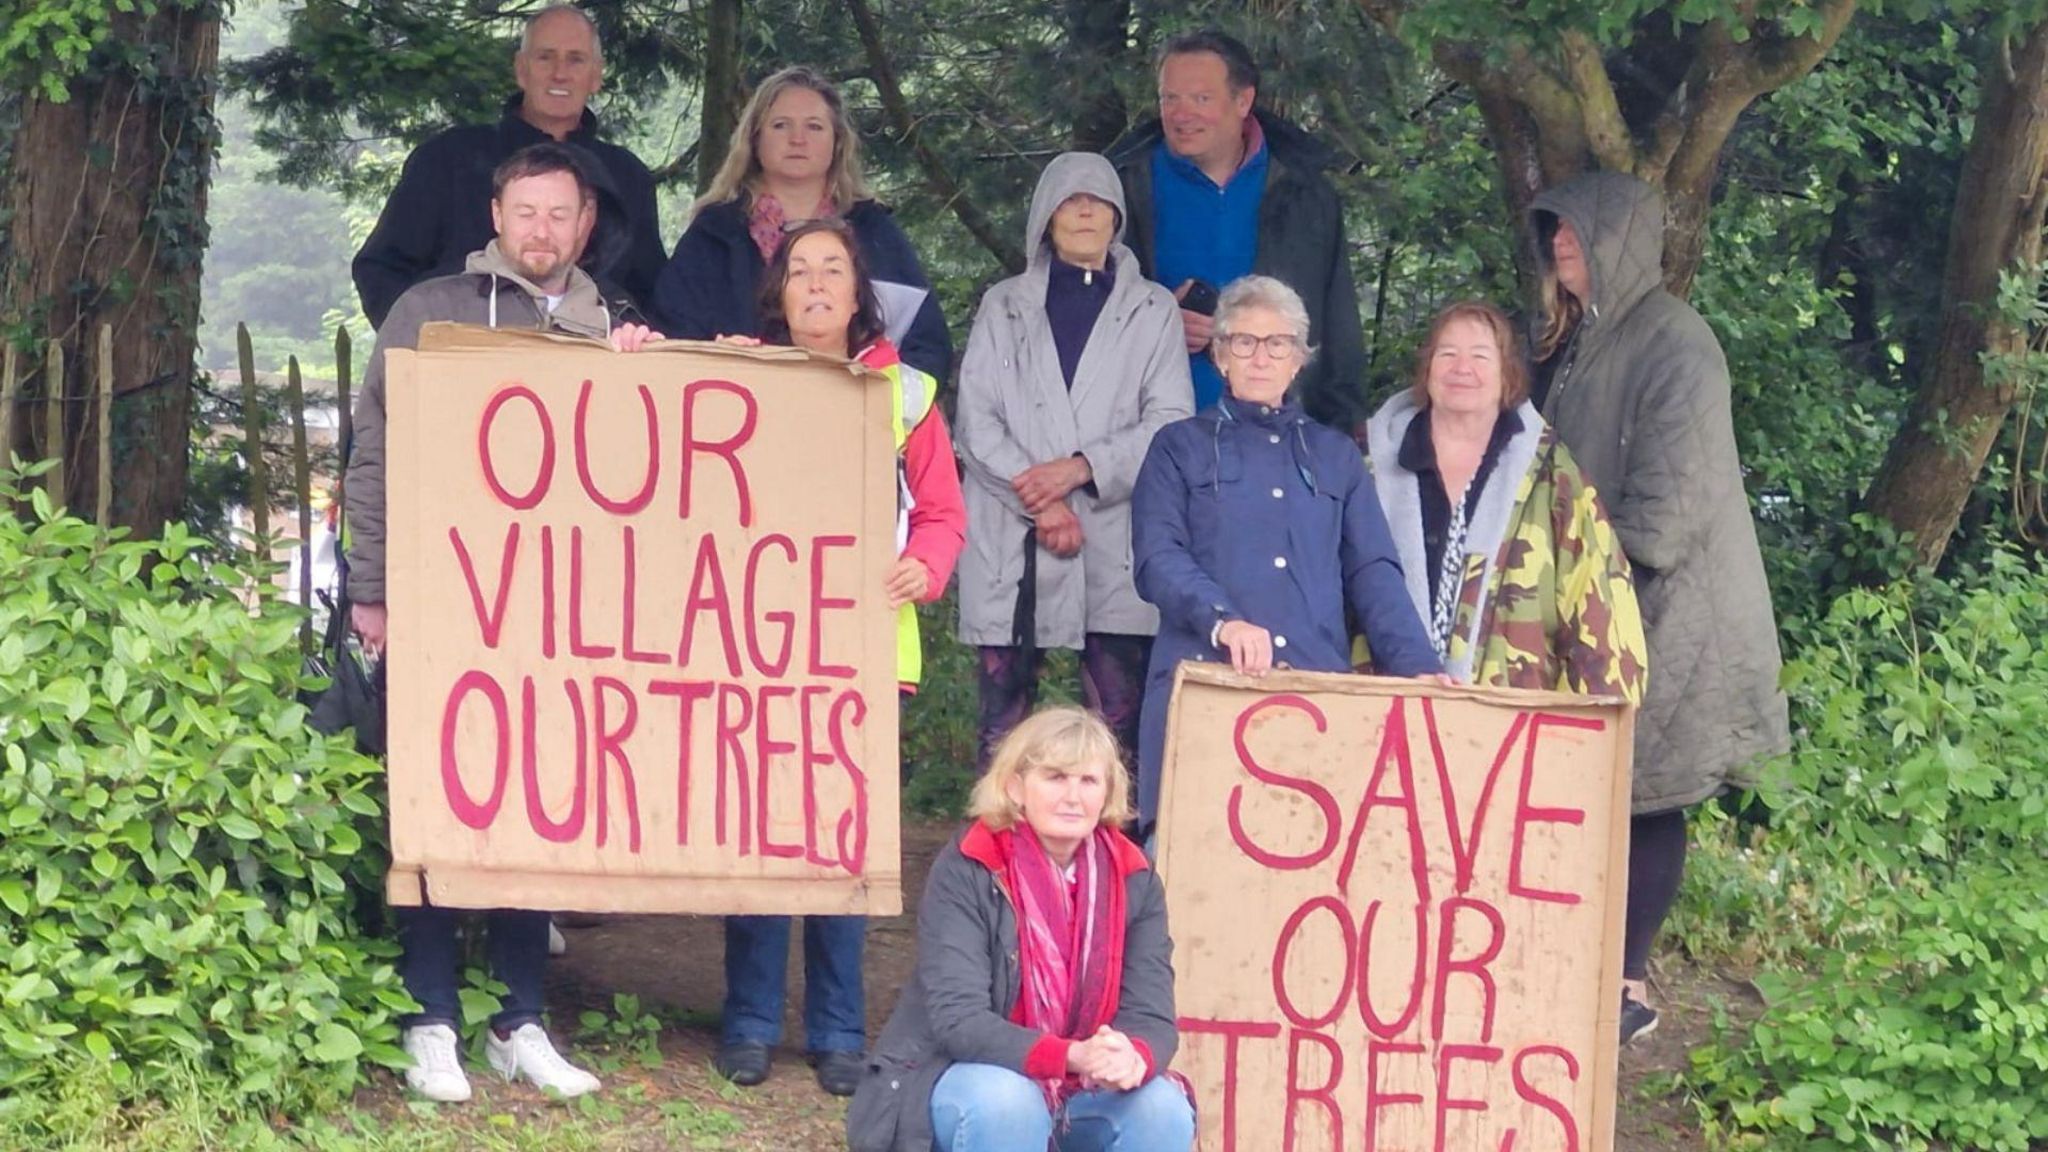 Wadhurst residents nestled among the trees with placards